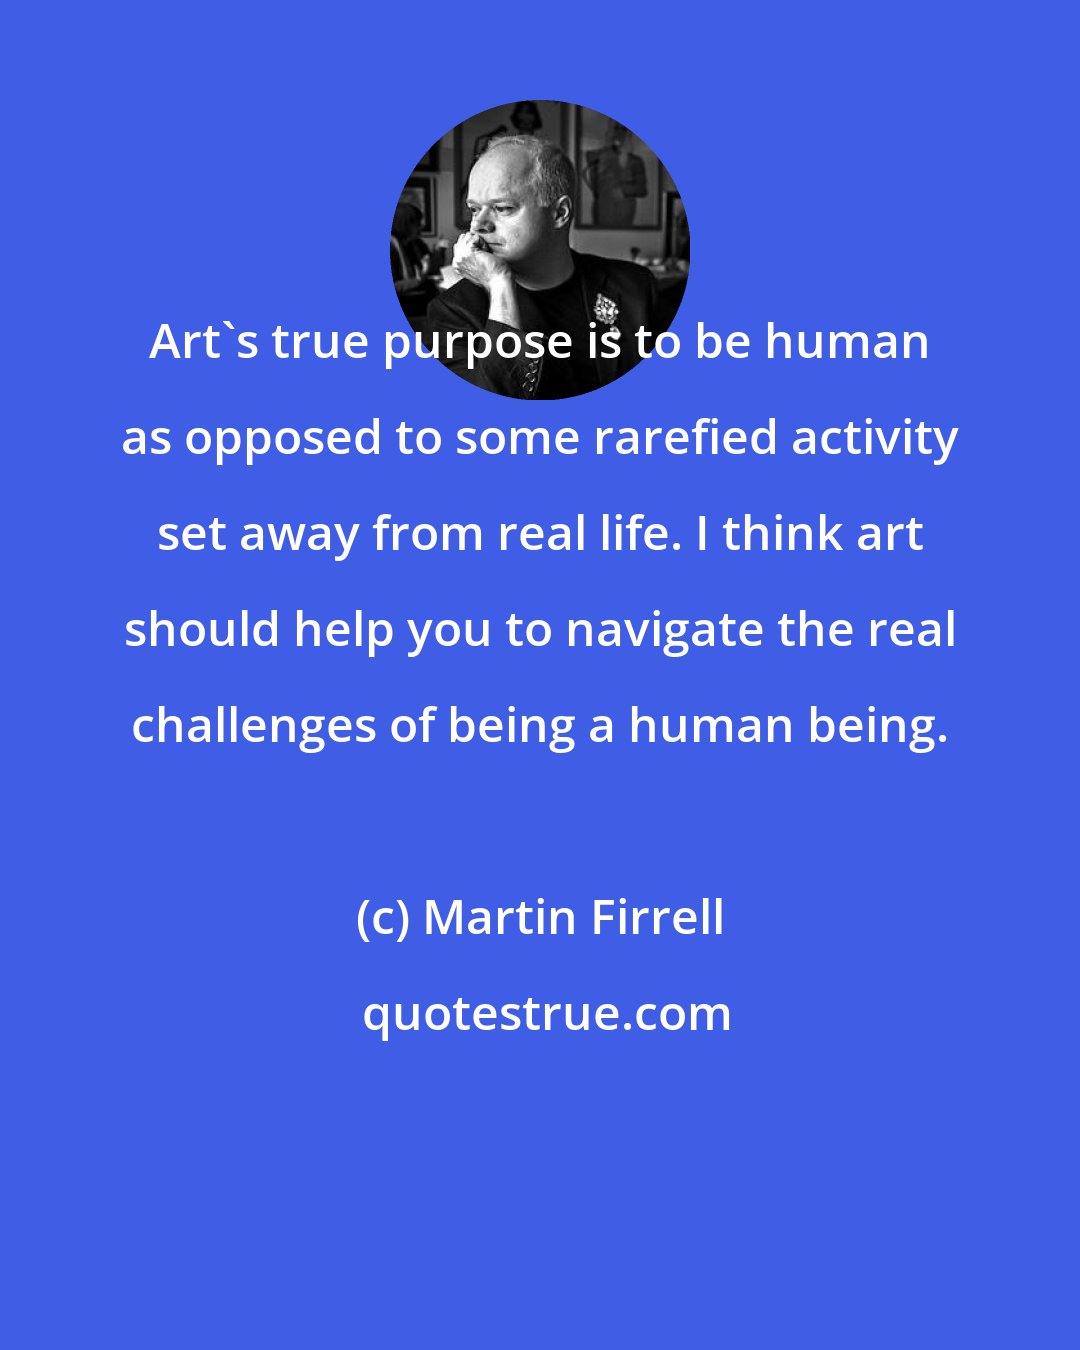 Martin Firrell: Art's true purpose is to be human as opposed to some rarefied activity set away from real life. I think art should help you to navigate the real challenges of being a human being.